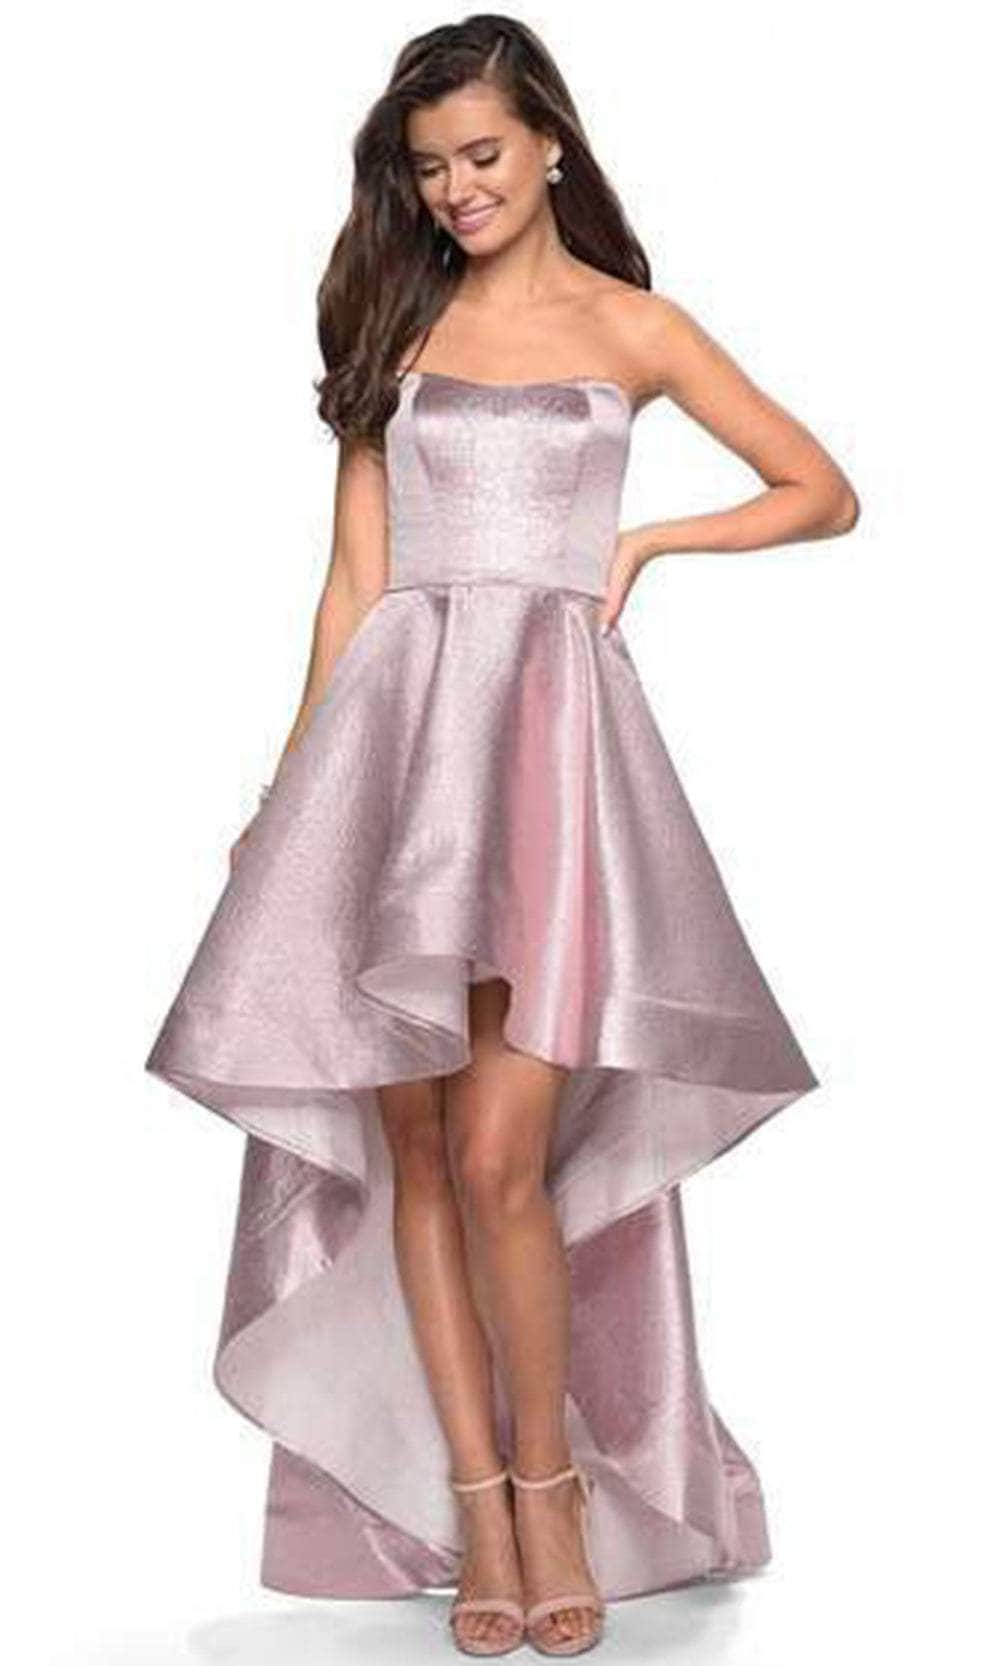 La Femme - Sweetheart High Low Dress 27783SC - 1 pc Pink In Size 0 Available CCSALE 0 / Pink